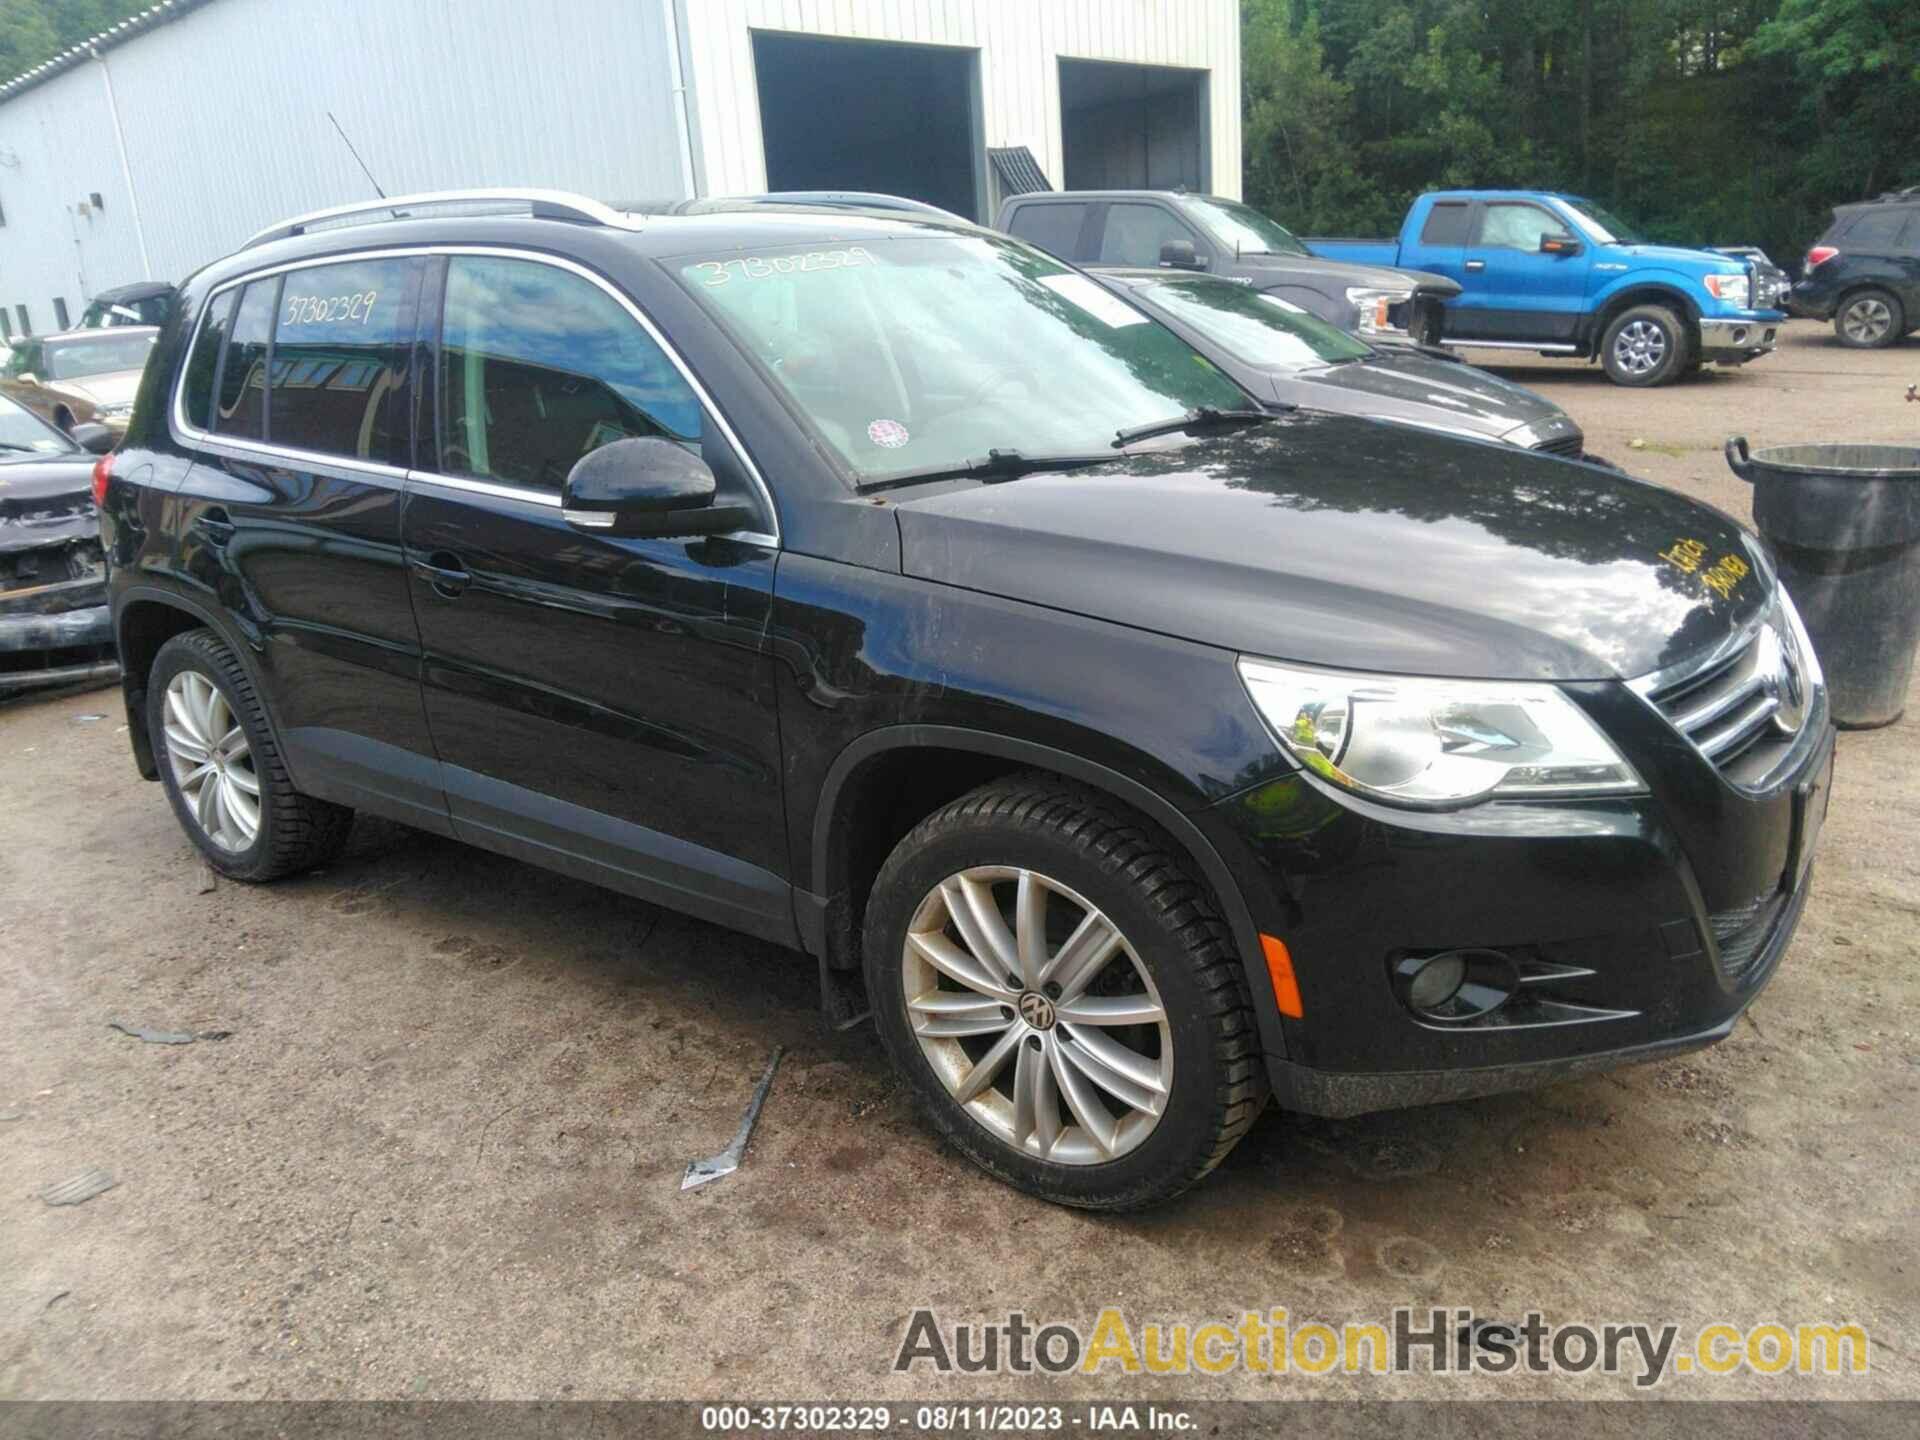 VOLKSWAGEN TIGUAN SE 4MOTION WSUNROOF &, WVGBV7AX9BW552588